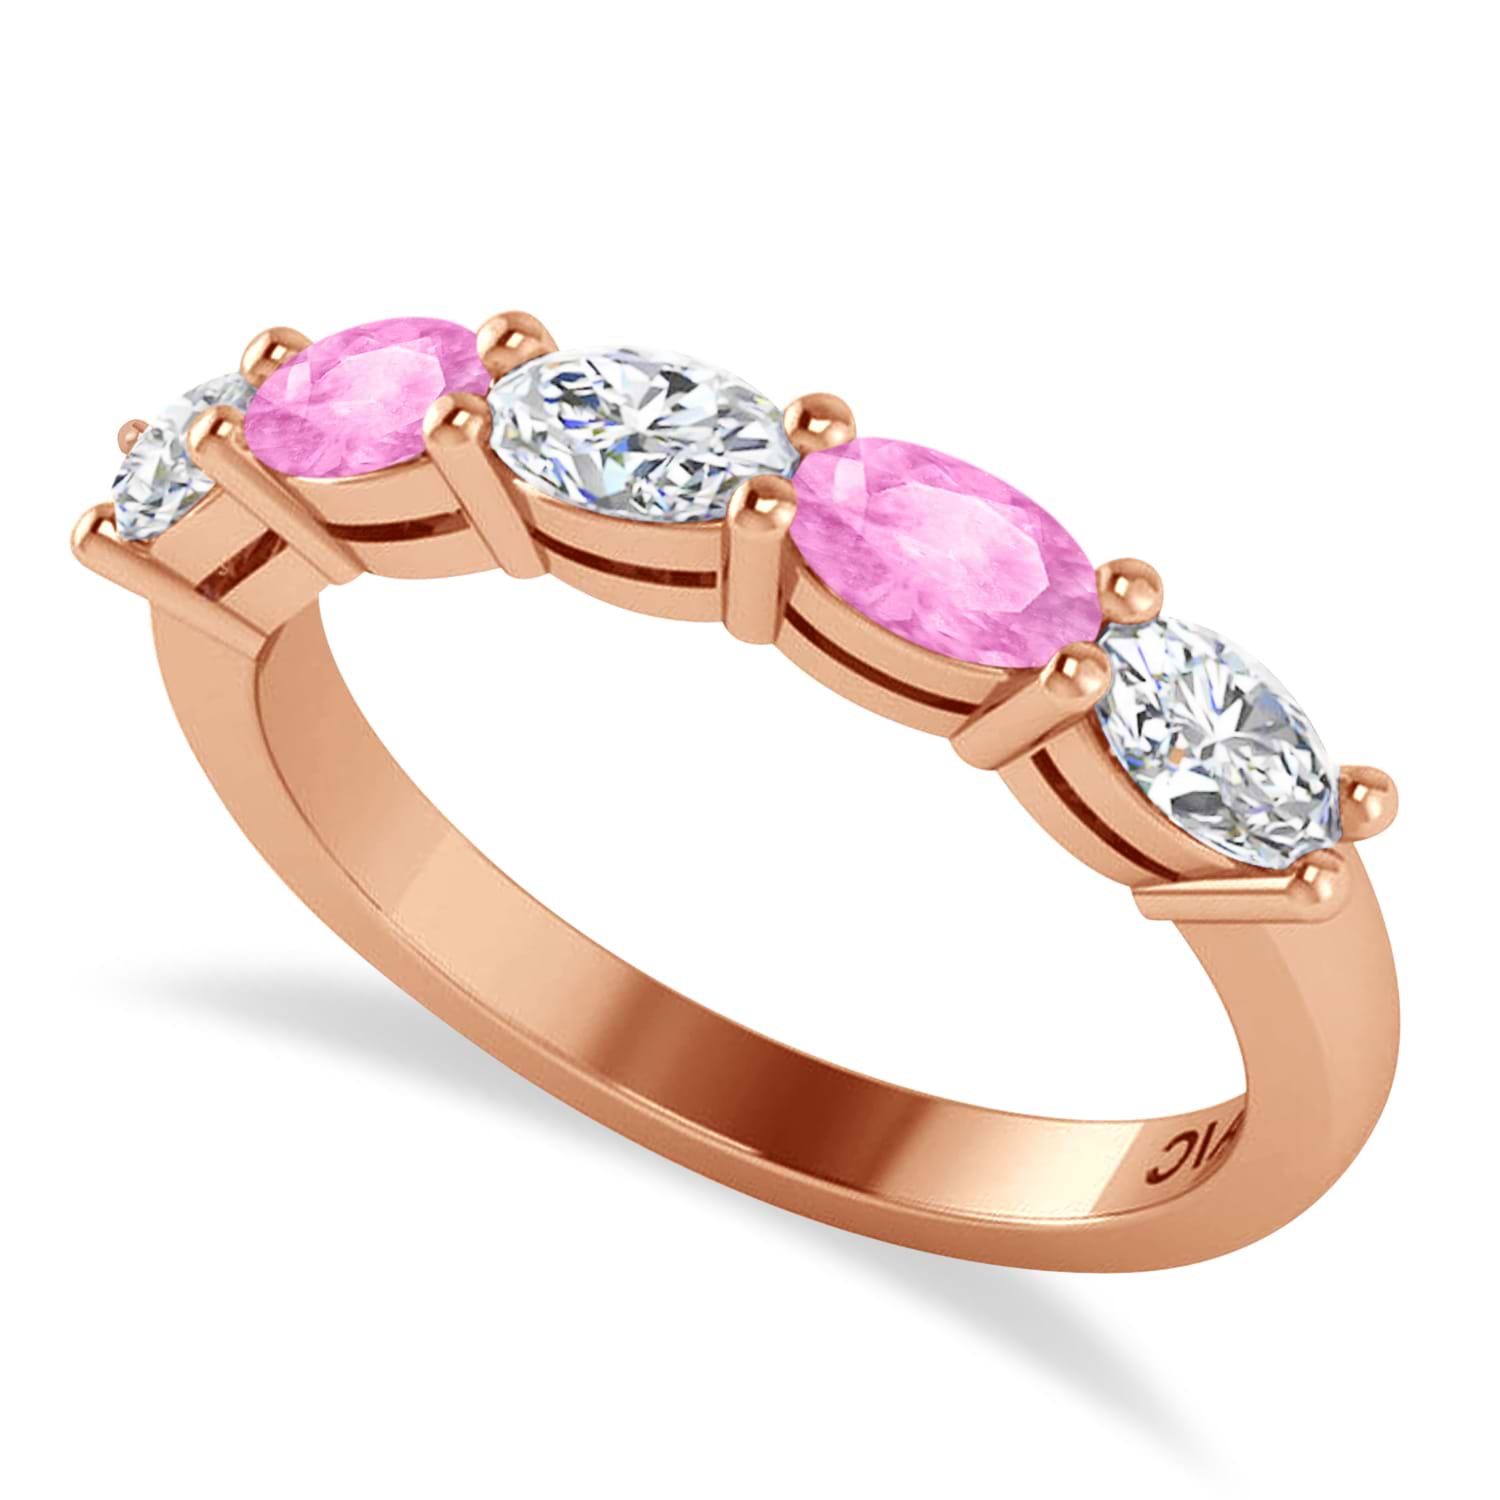 Oval Diamond & Pink Sapphire Five Stone Ring 14k Rose Gold (1.25ct)